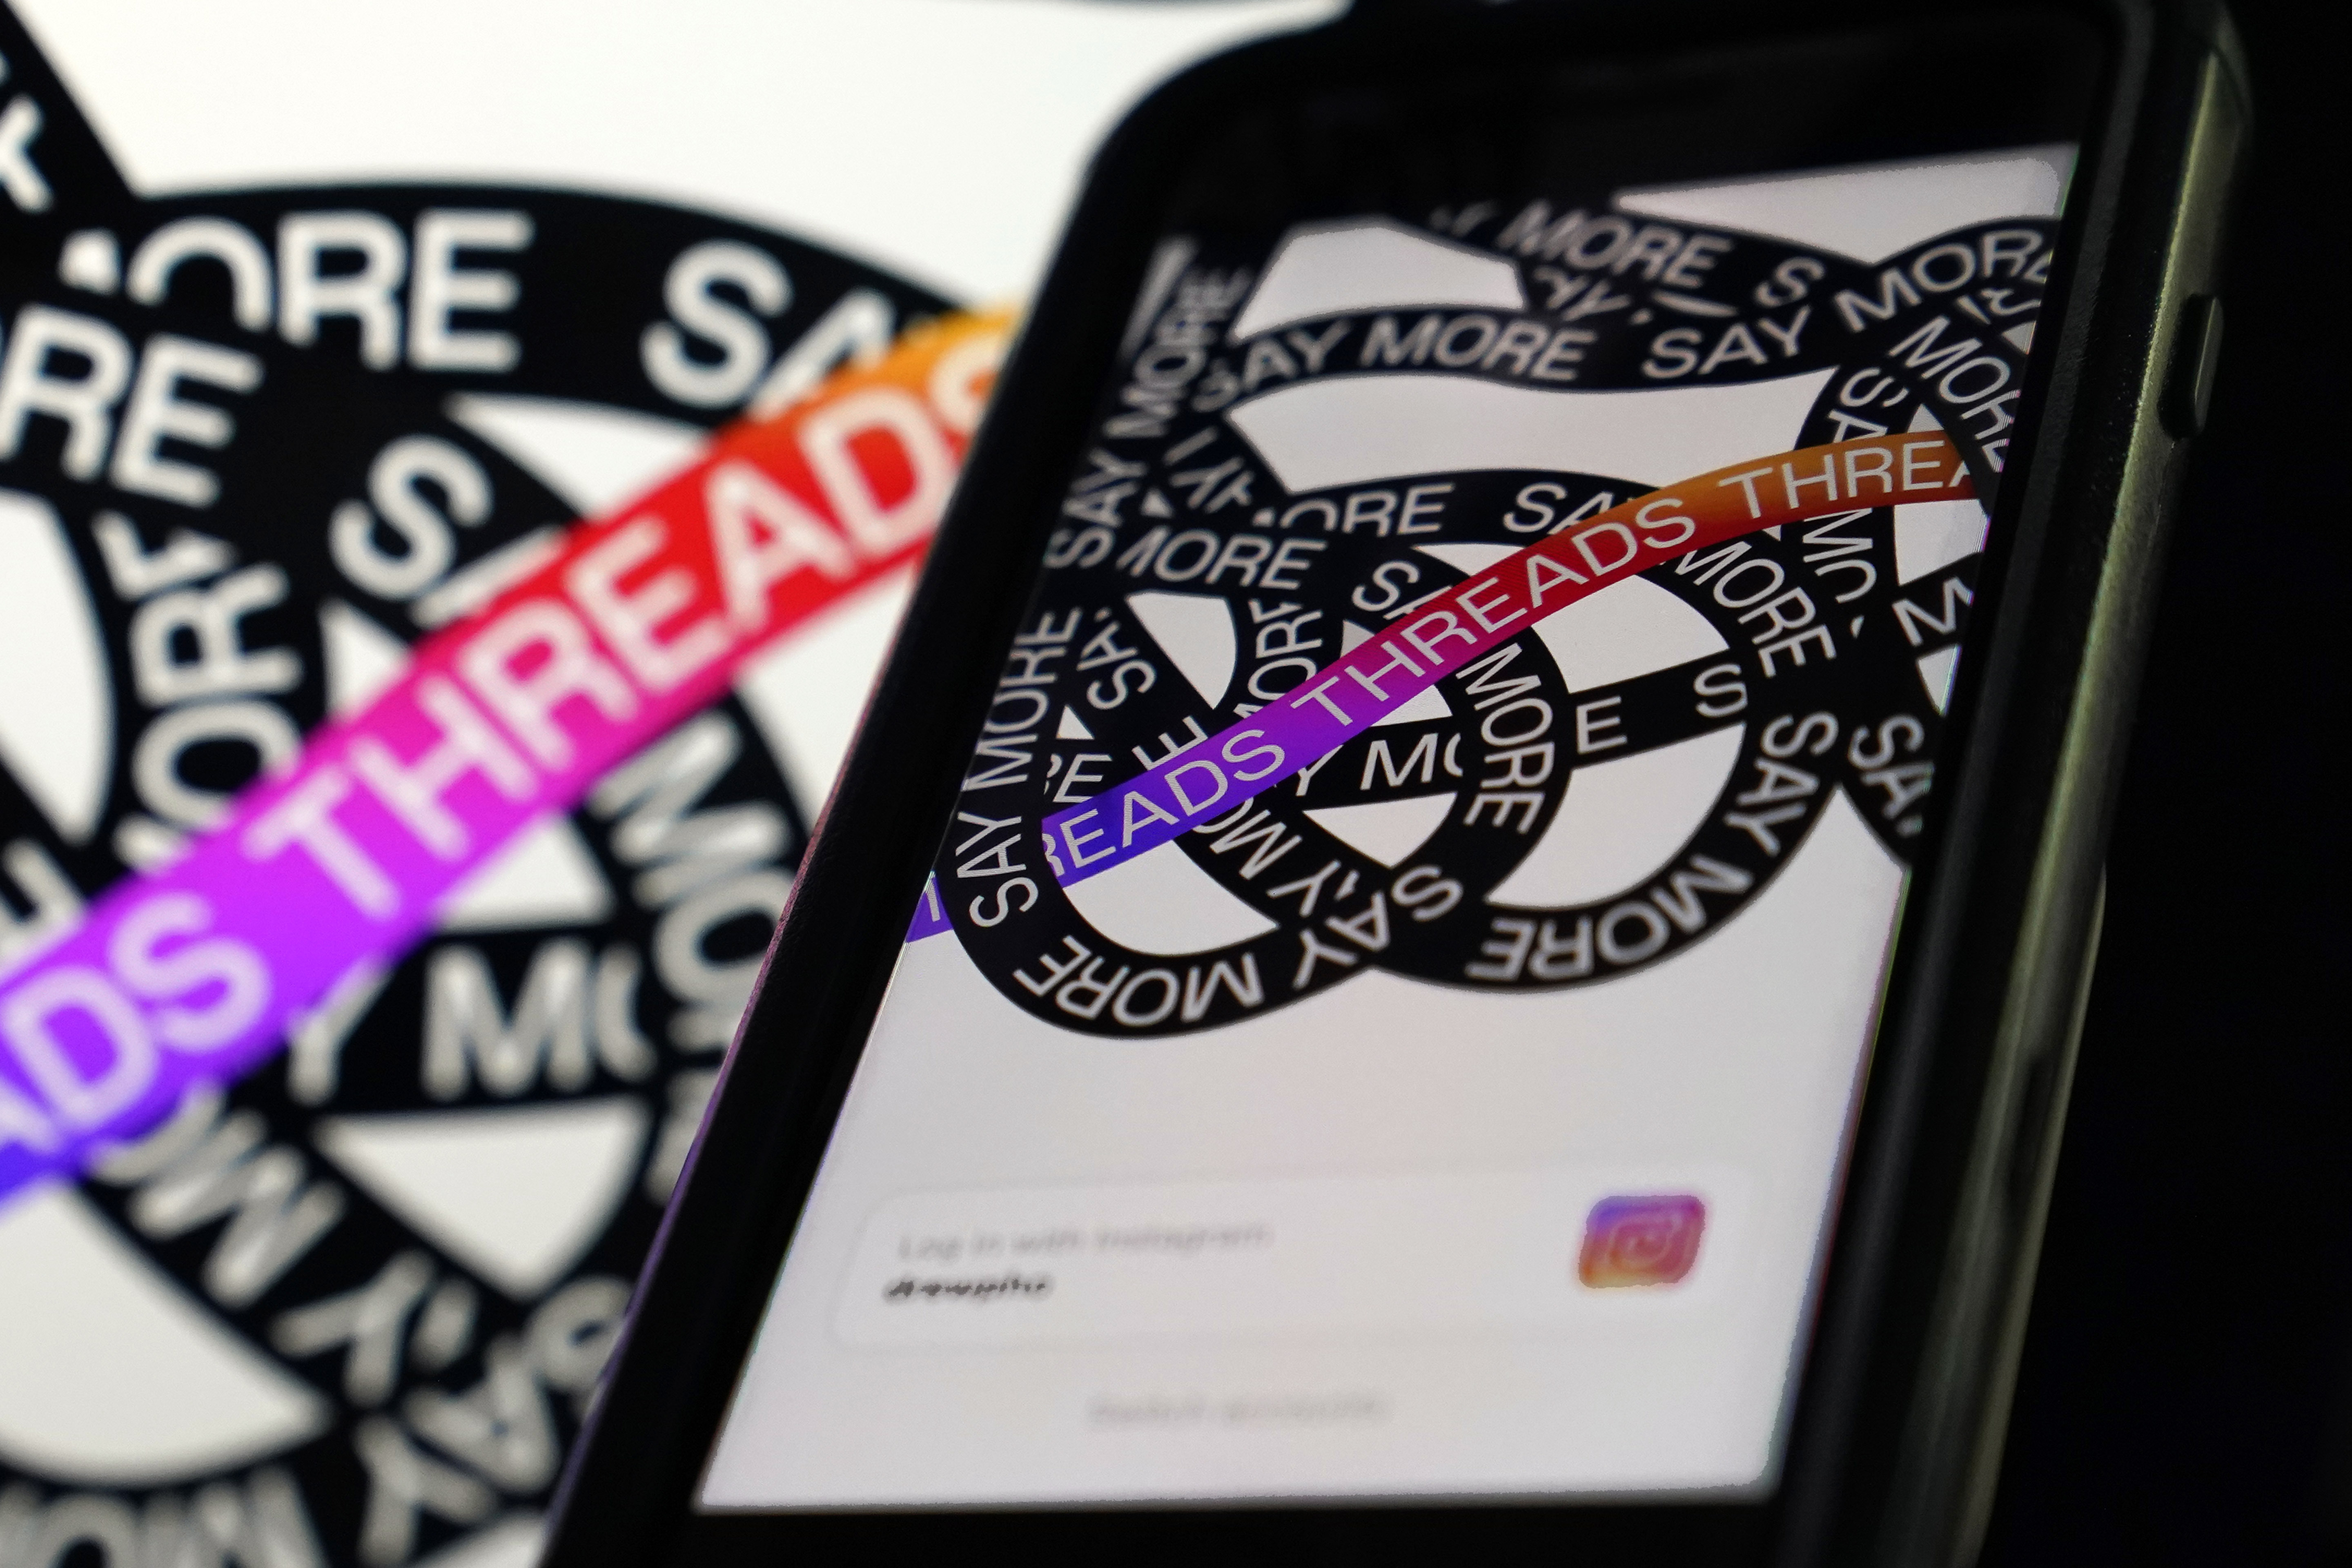 Threads Users Can Now Opt Out of Sharing Posts on Instagram and Facebook